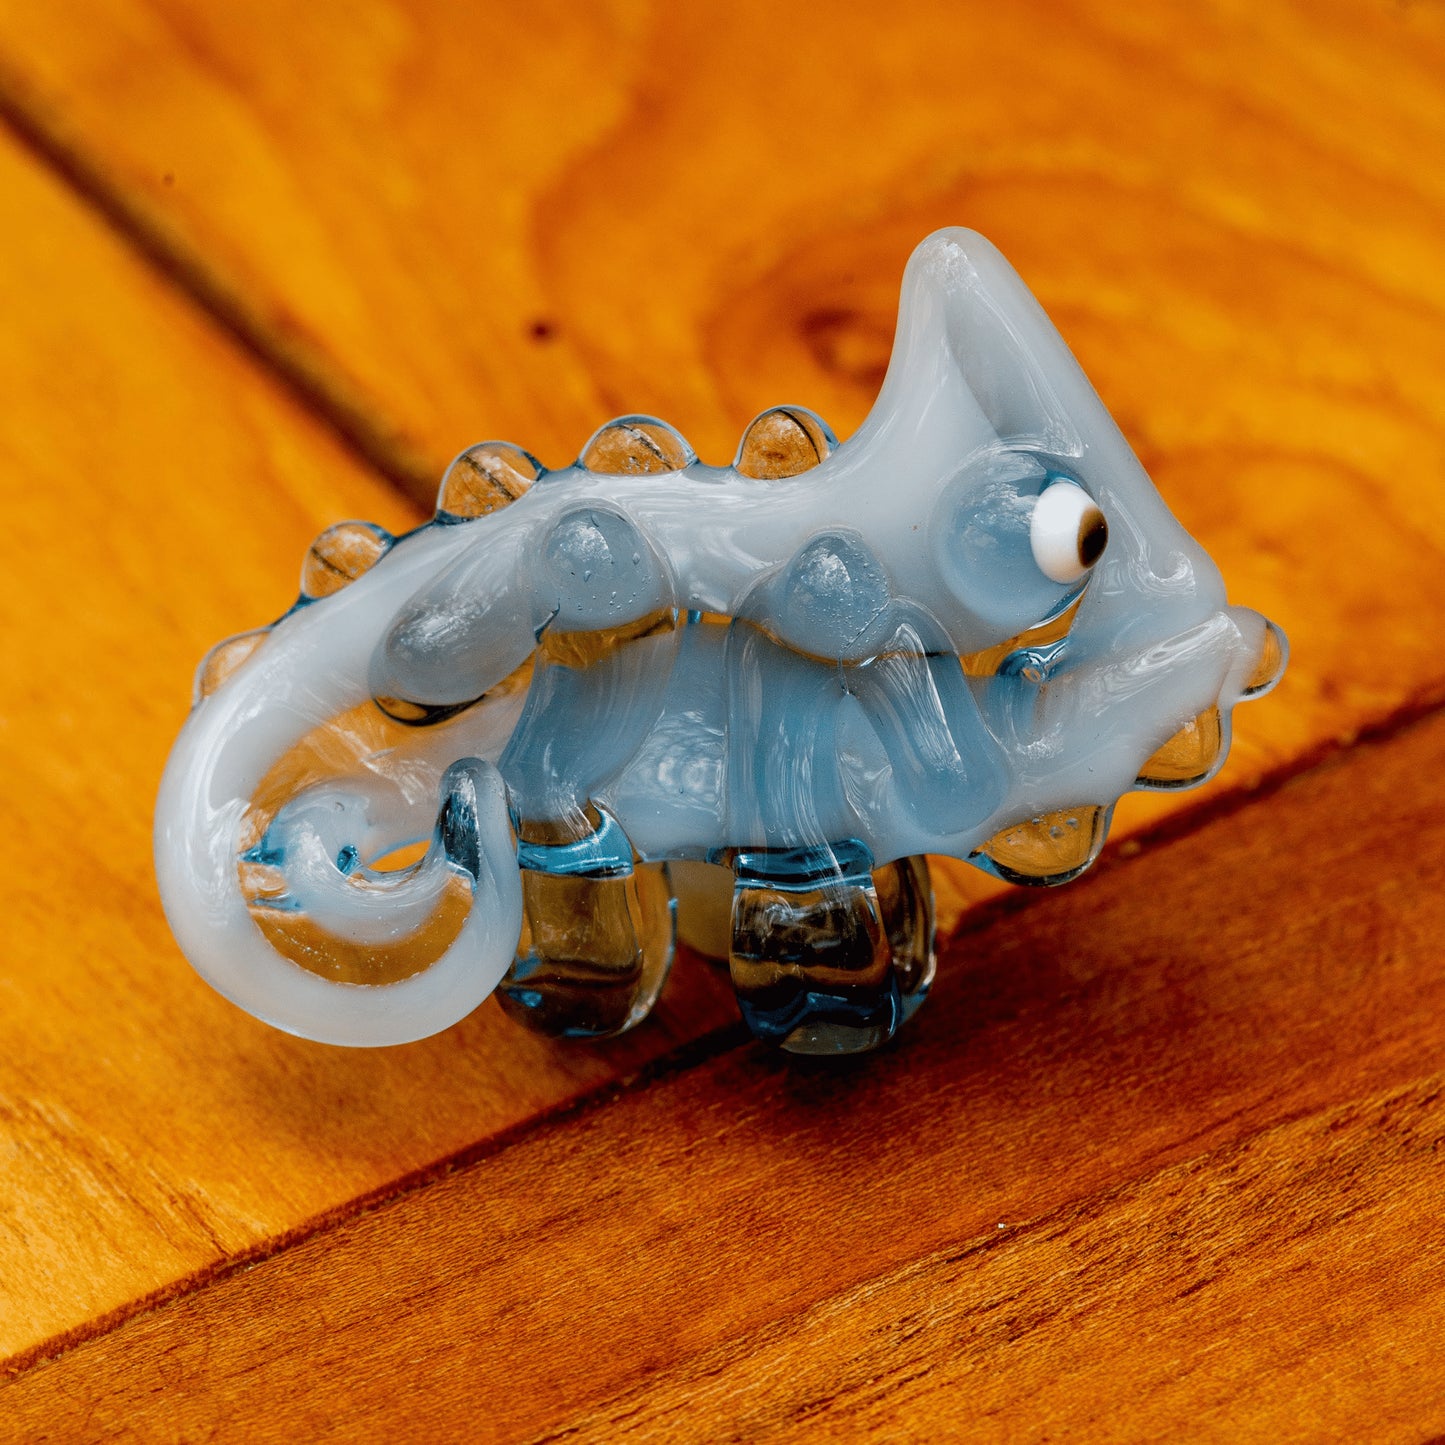 meticulously crafted glass pendant - Chameleon Pendant (H) by Willy That Glass Guy